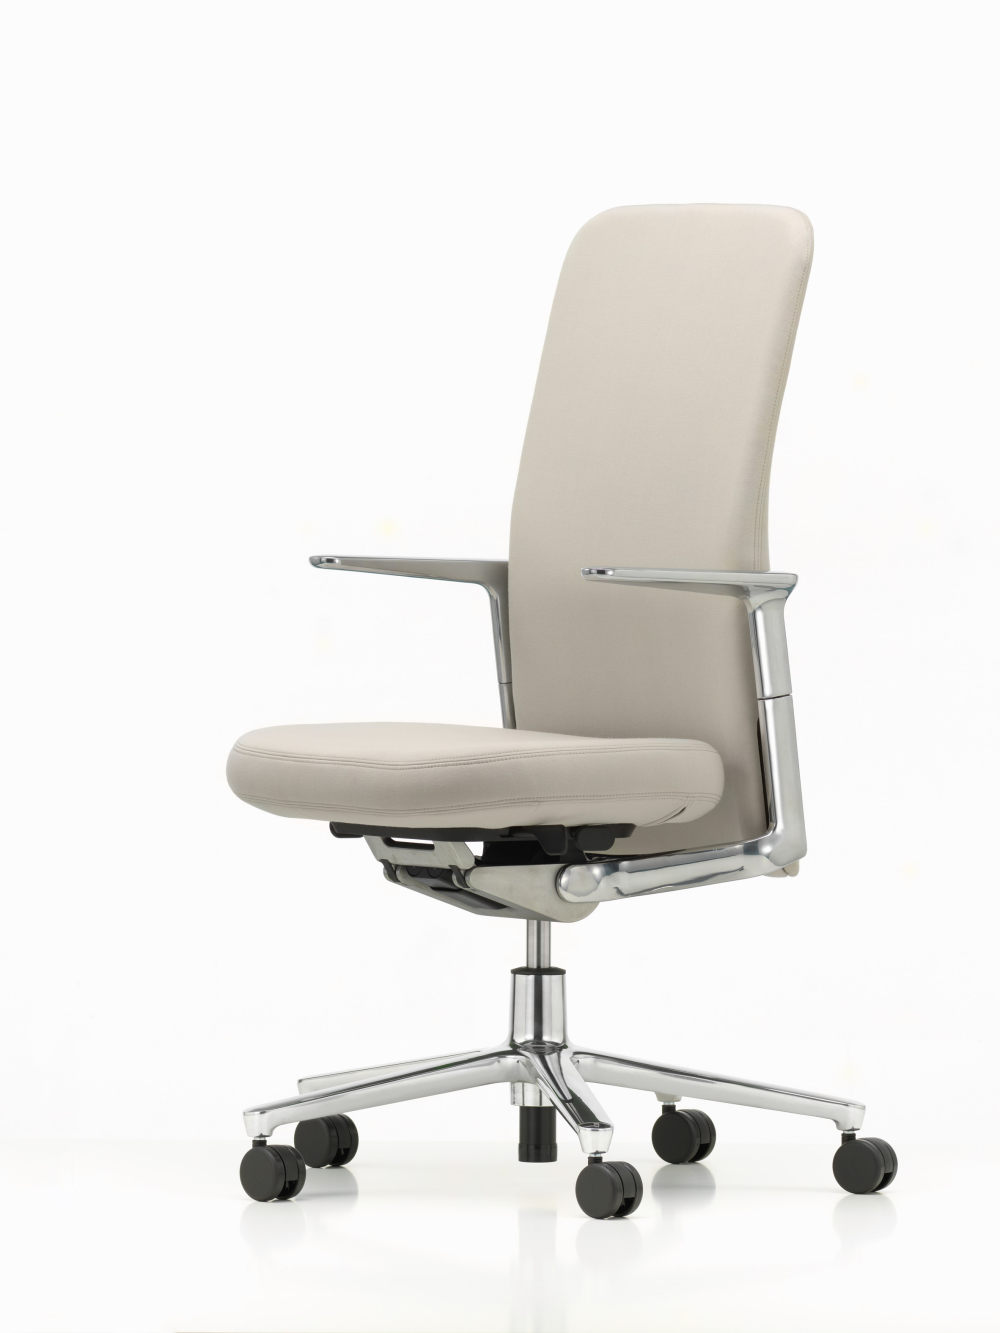 sq-pacific-chair-barber-and-ssgerby-for-vitra-design-furniture_rushi_2364_col_1.jpg